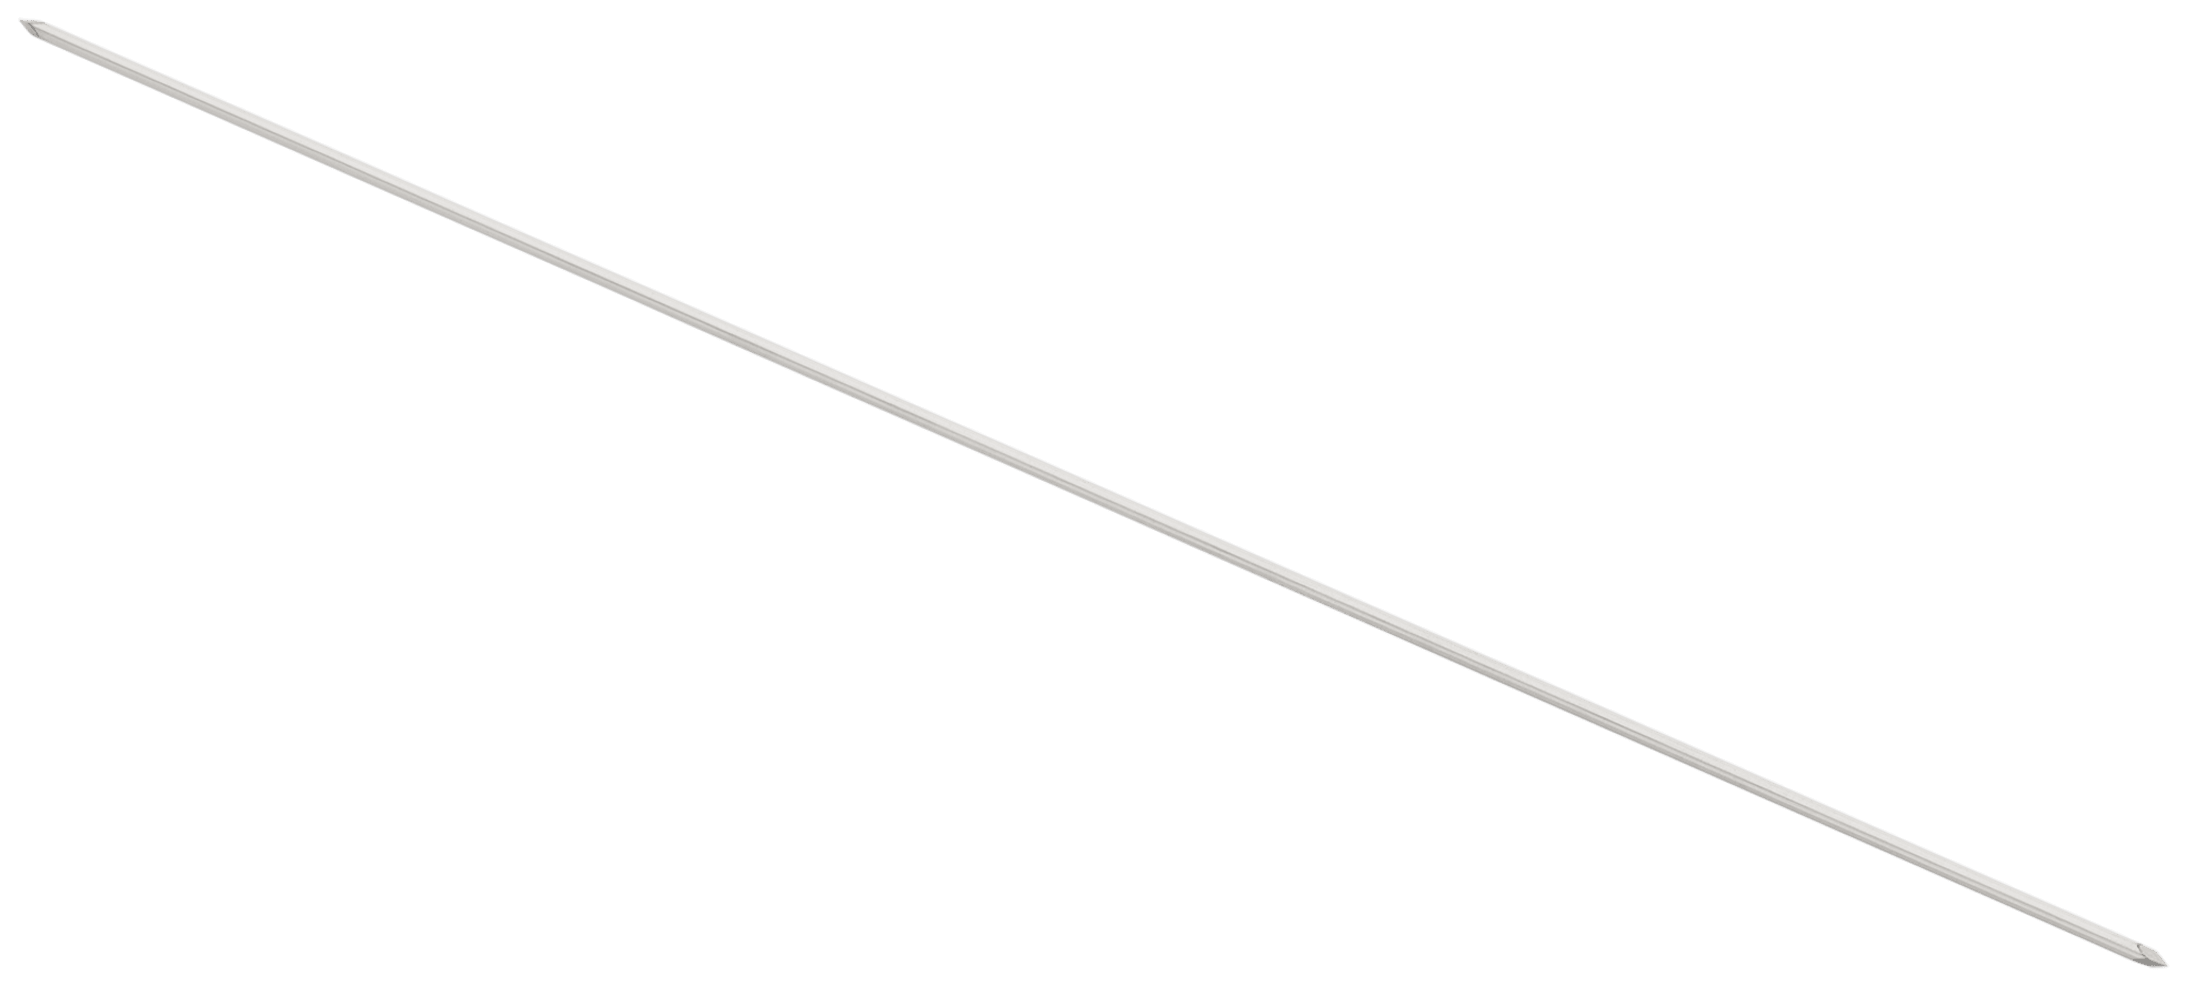 Nitinol Guidewire with Double Trocar Tip, 0.045" x 5.91" (1.1 mm x 150 mm)